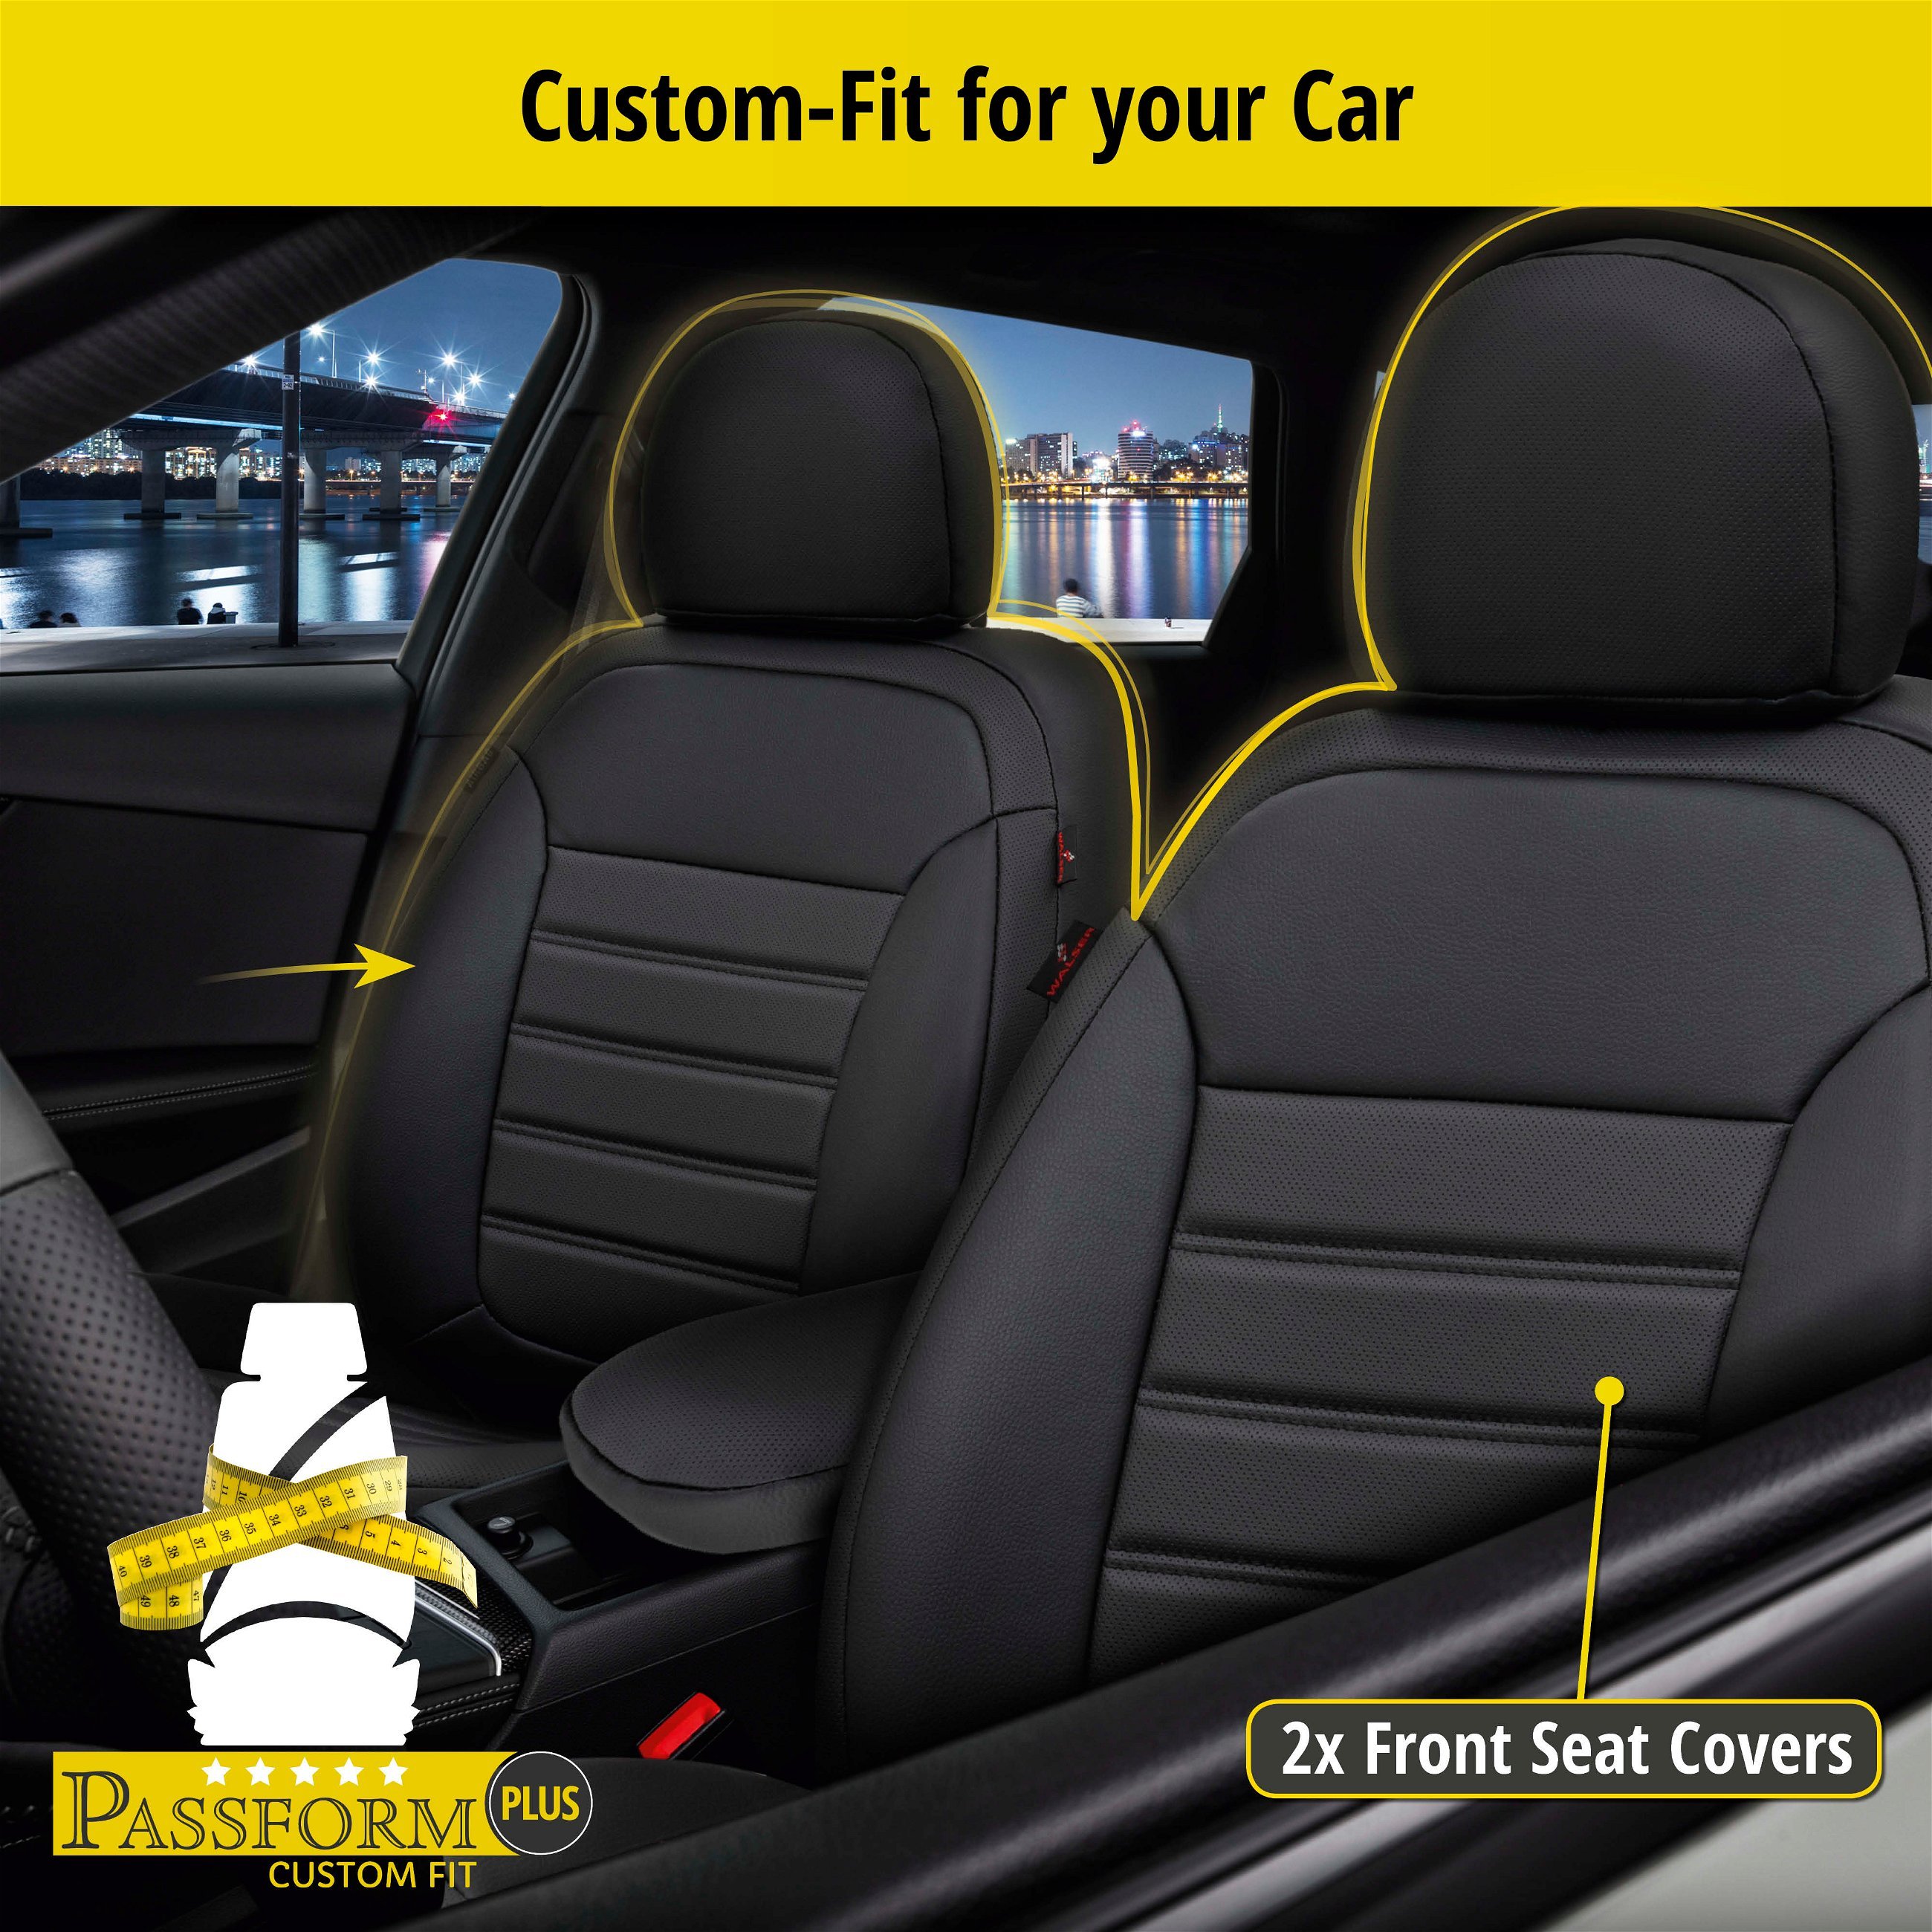 Seat Cover Robusto for VW Polo (6R1, 6C1) 03/2009-Today, 2 seat covers for normal seats